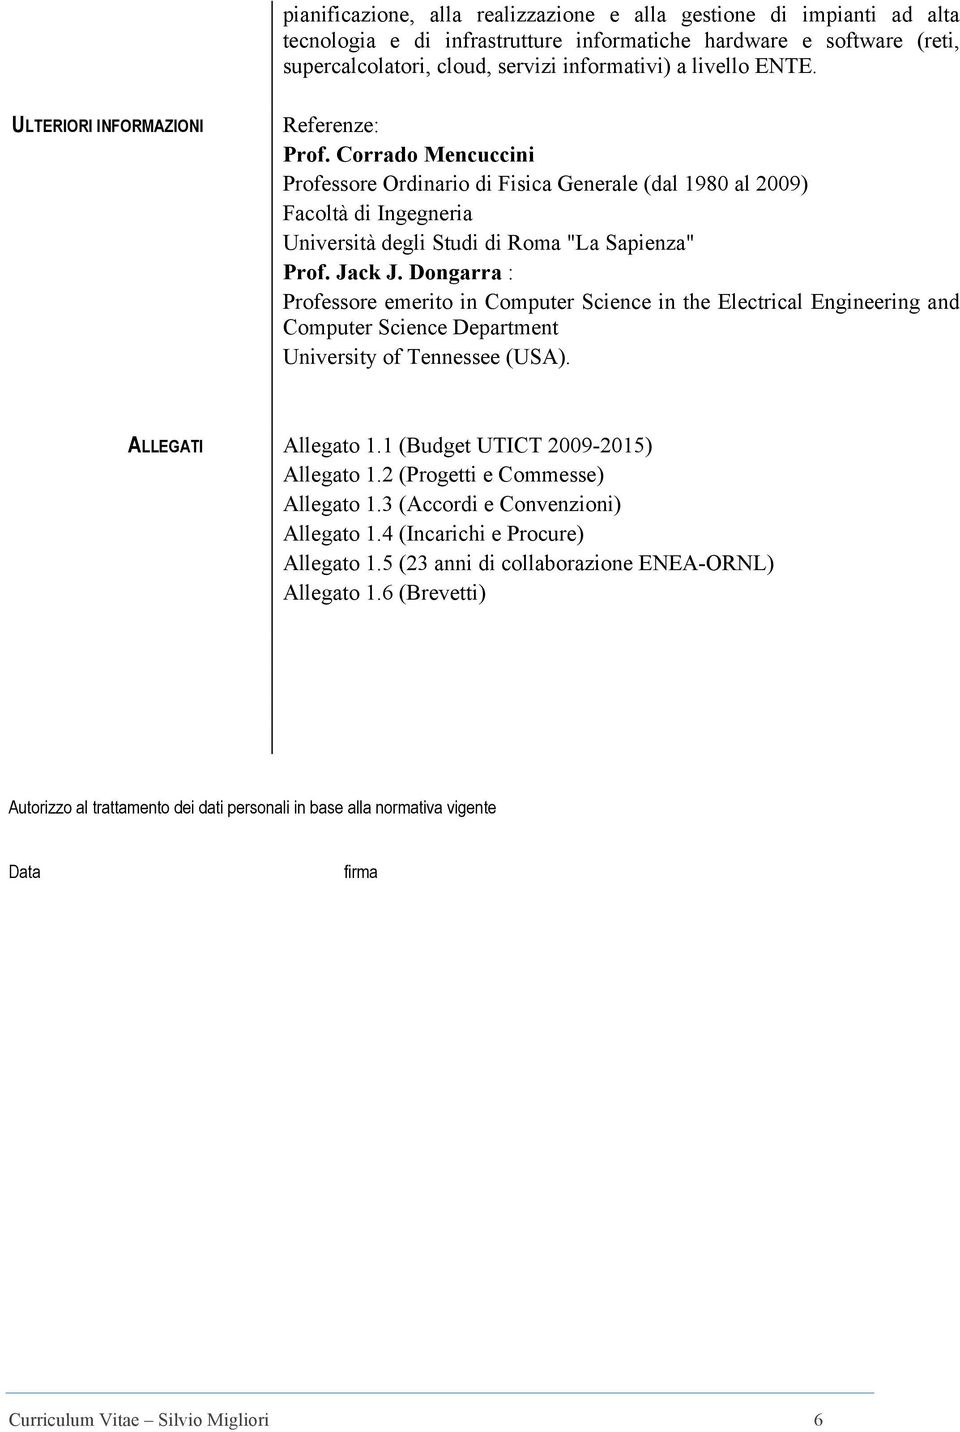 Jack J. Dongarra : Professore emerito in Computer Science in the Electrical Engineering and Computer Science Department University of Tennessee (USA). ALLEGATI Allegato 1.